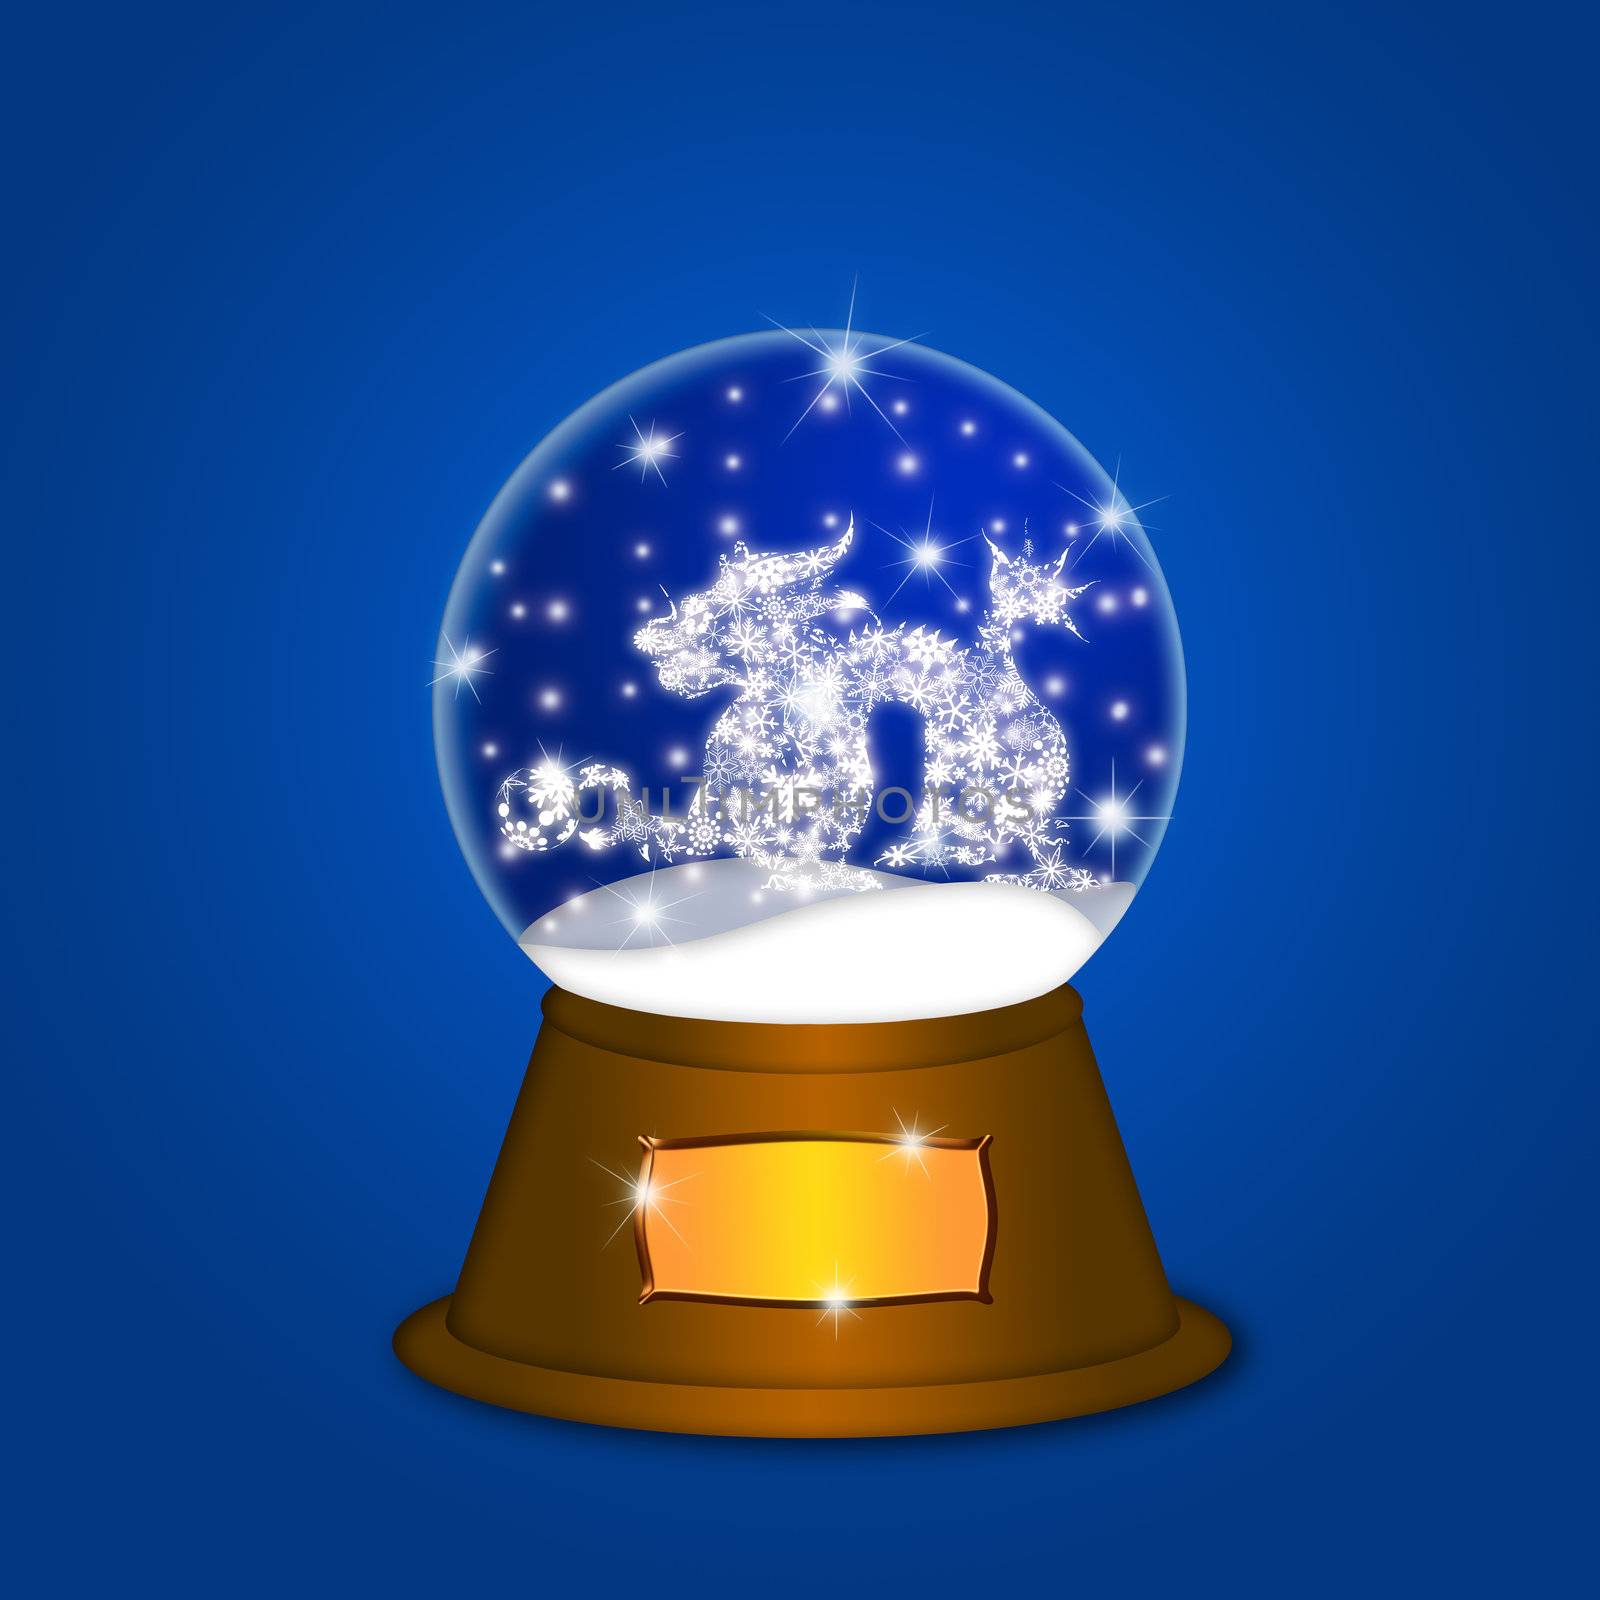 Water Snow Globe with Chinese Dragon and Ball Illustration on Blue Background